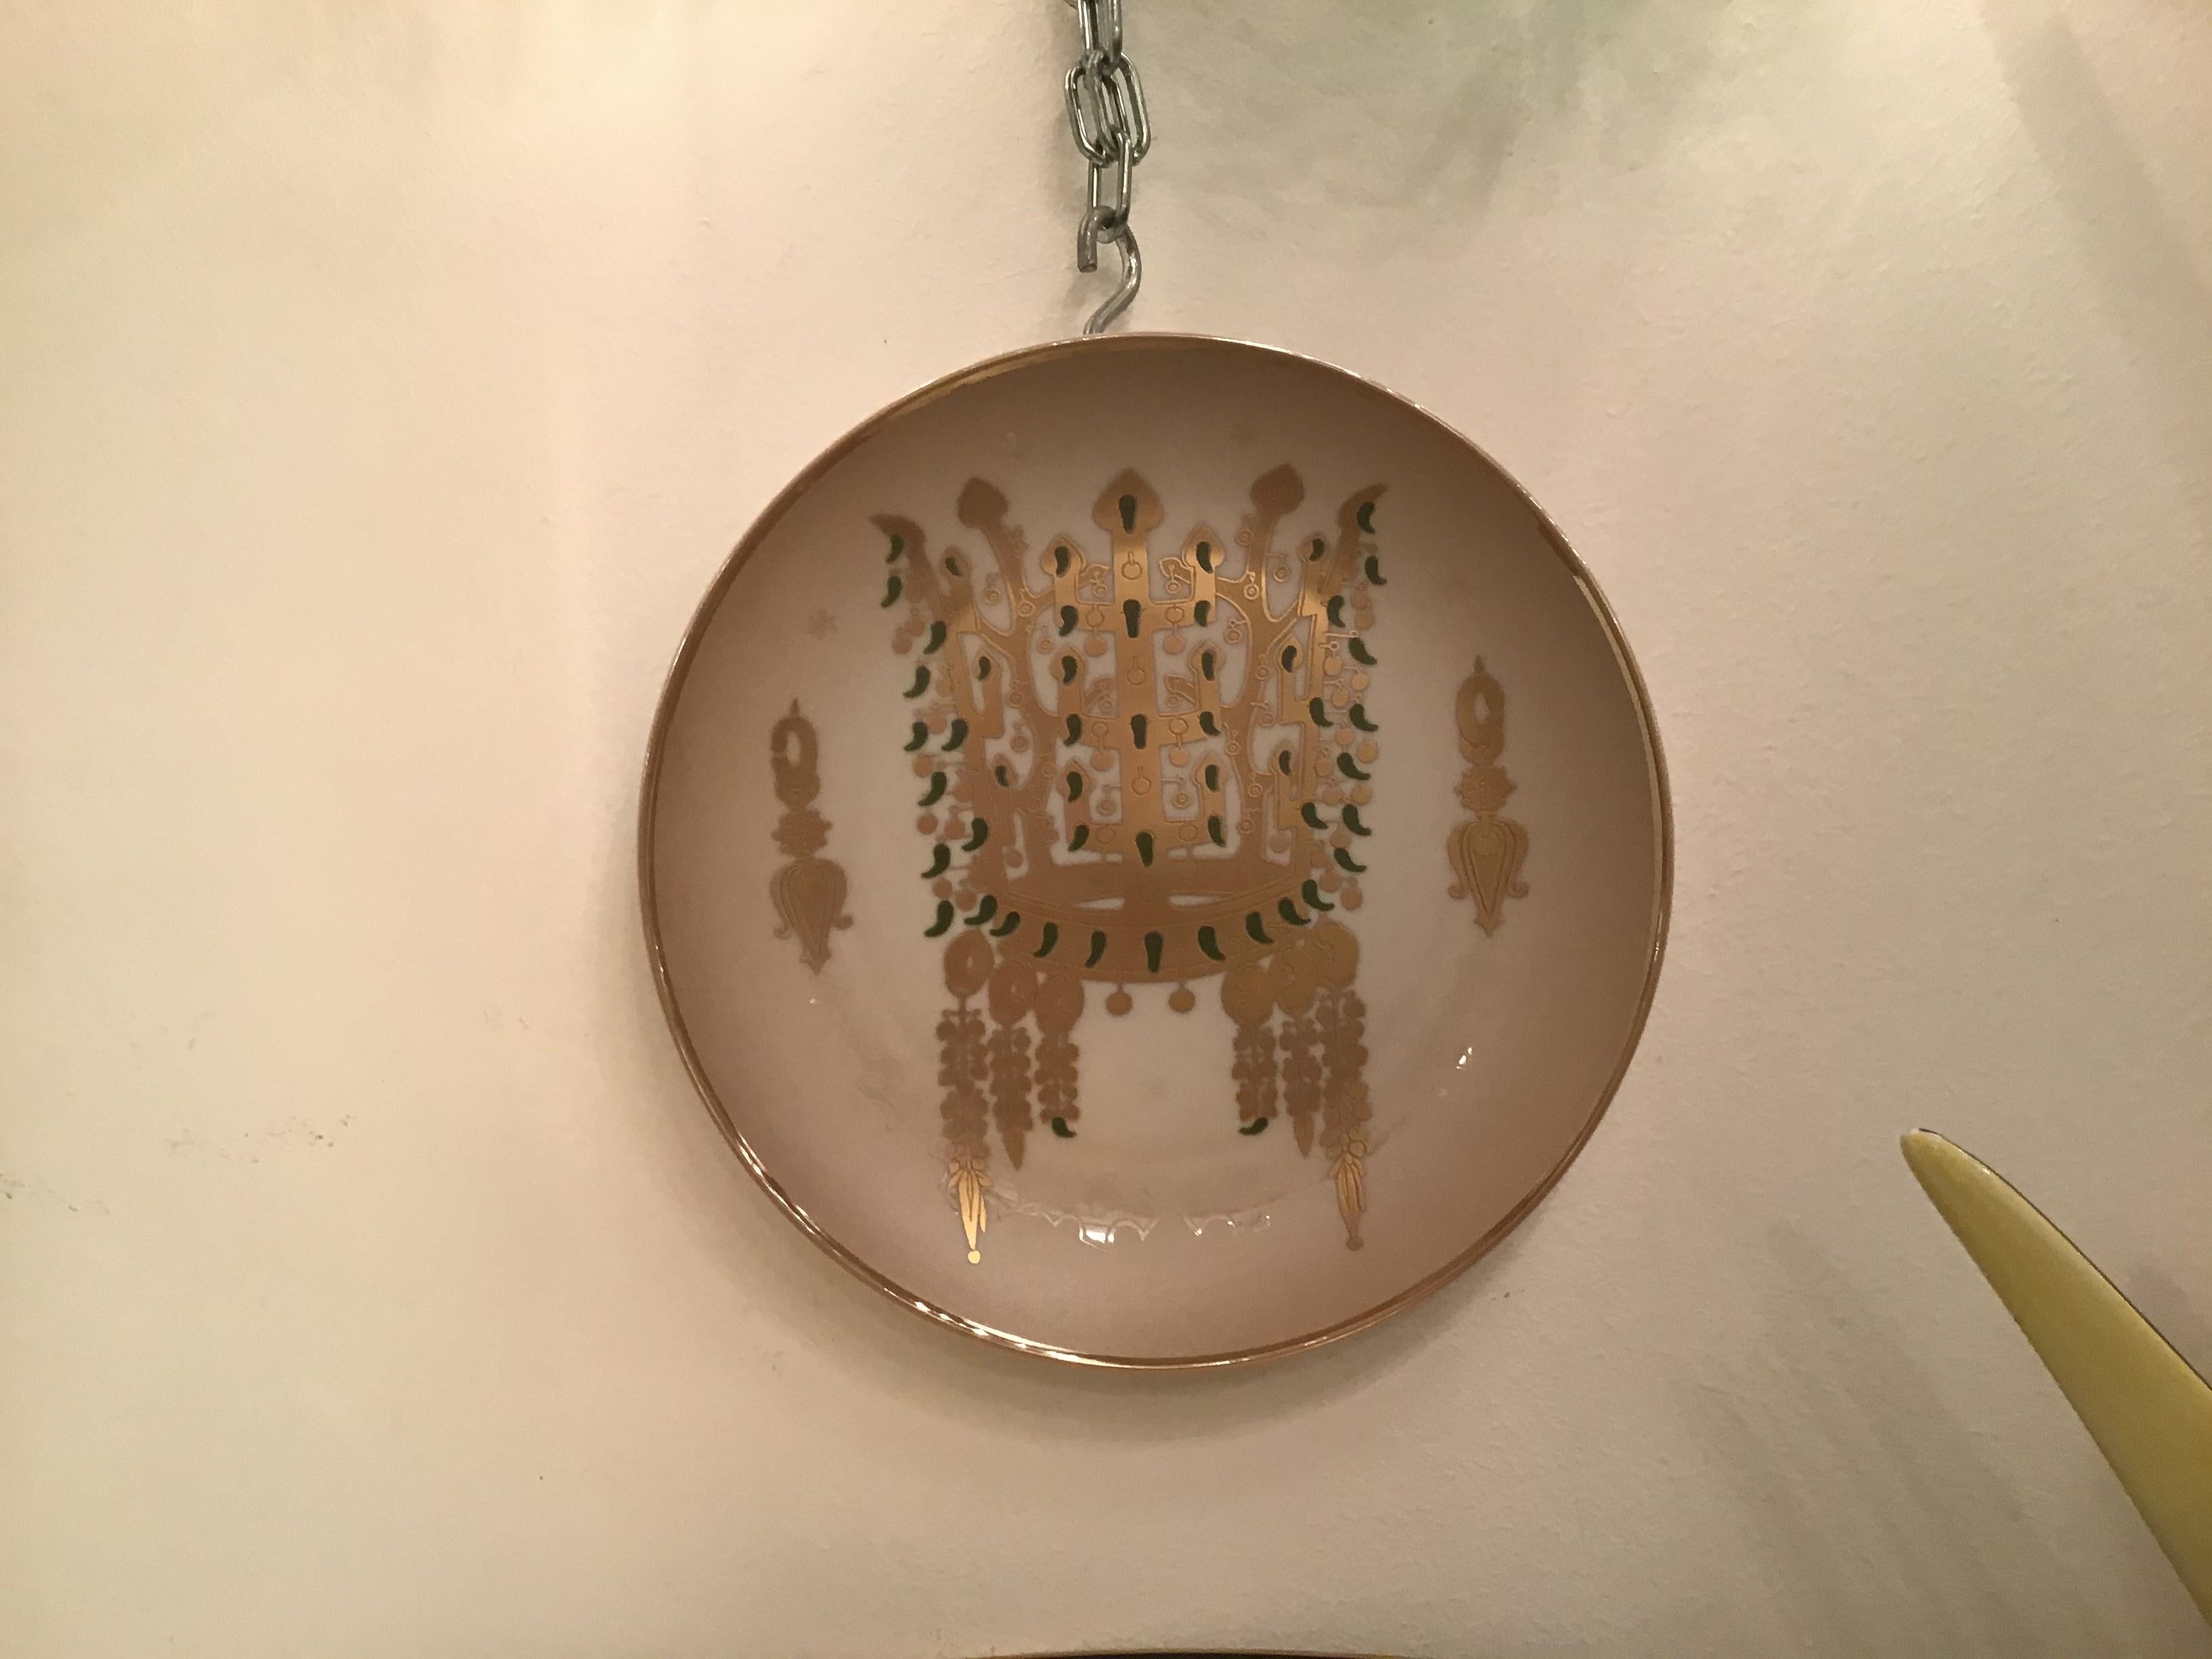 Morbelli Porcelain “Dinastia Silla” Wall Plates Worked with Pure Gold 1960 Italy For Sale 8